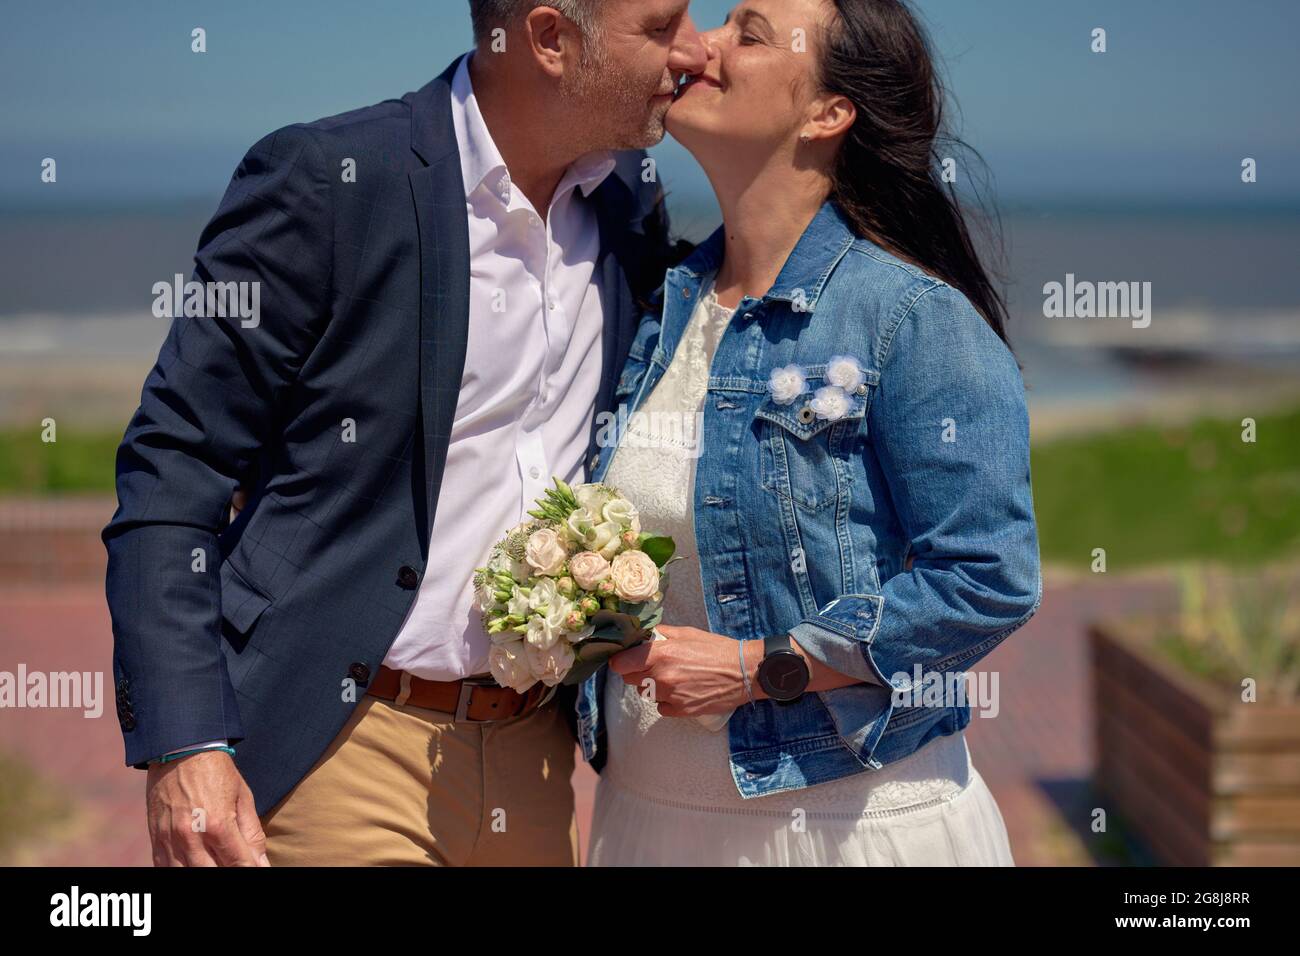 Happy romantic mature newlywed couple on their wedding day kissing outdoors on a promenade against an ocean backdrop wearing formal clothes and holdin Stock Photo